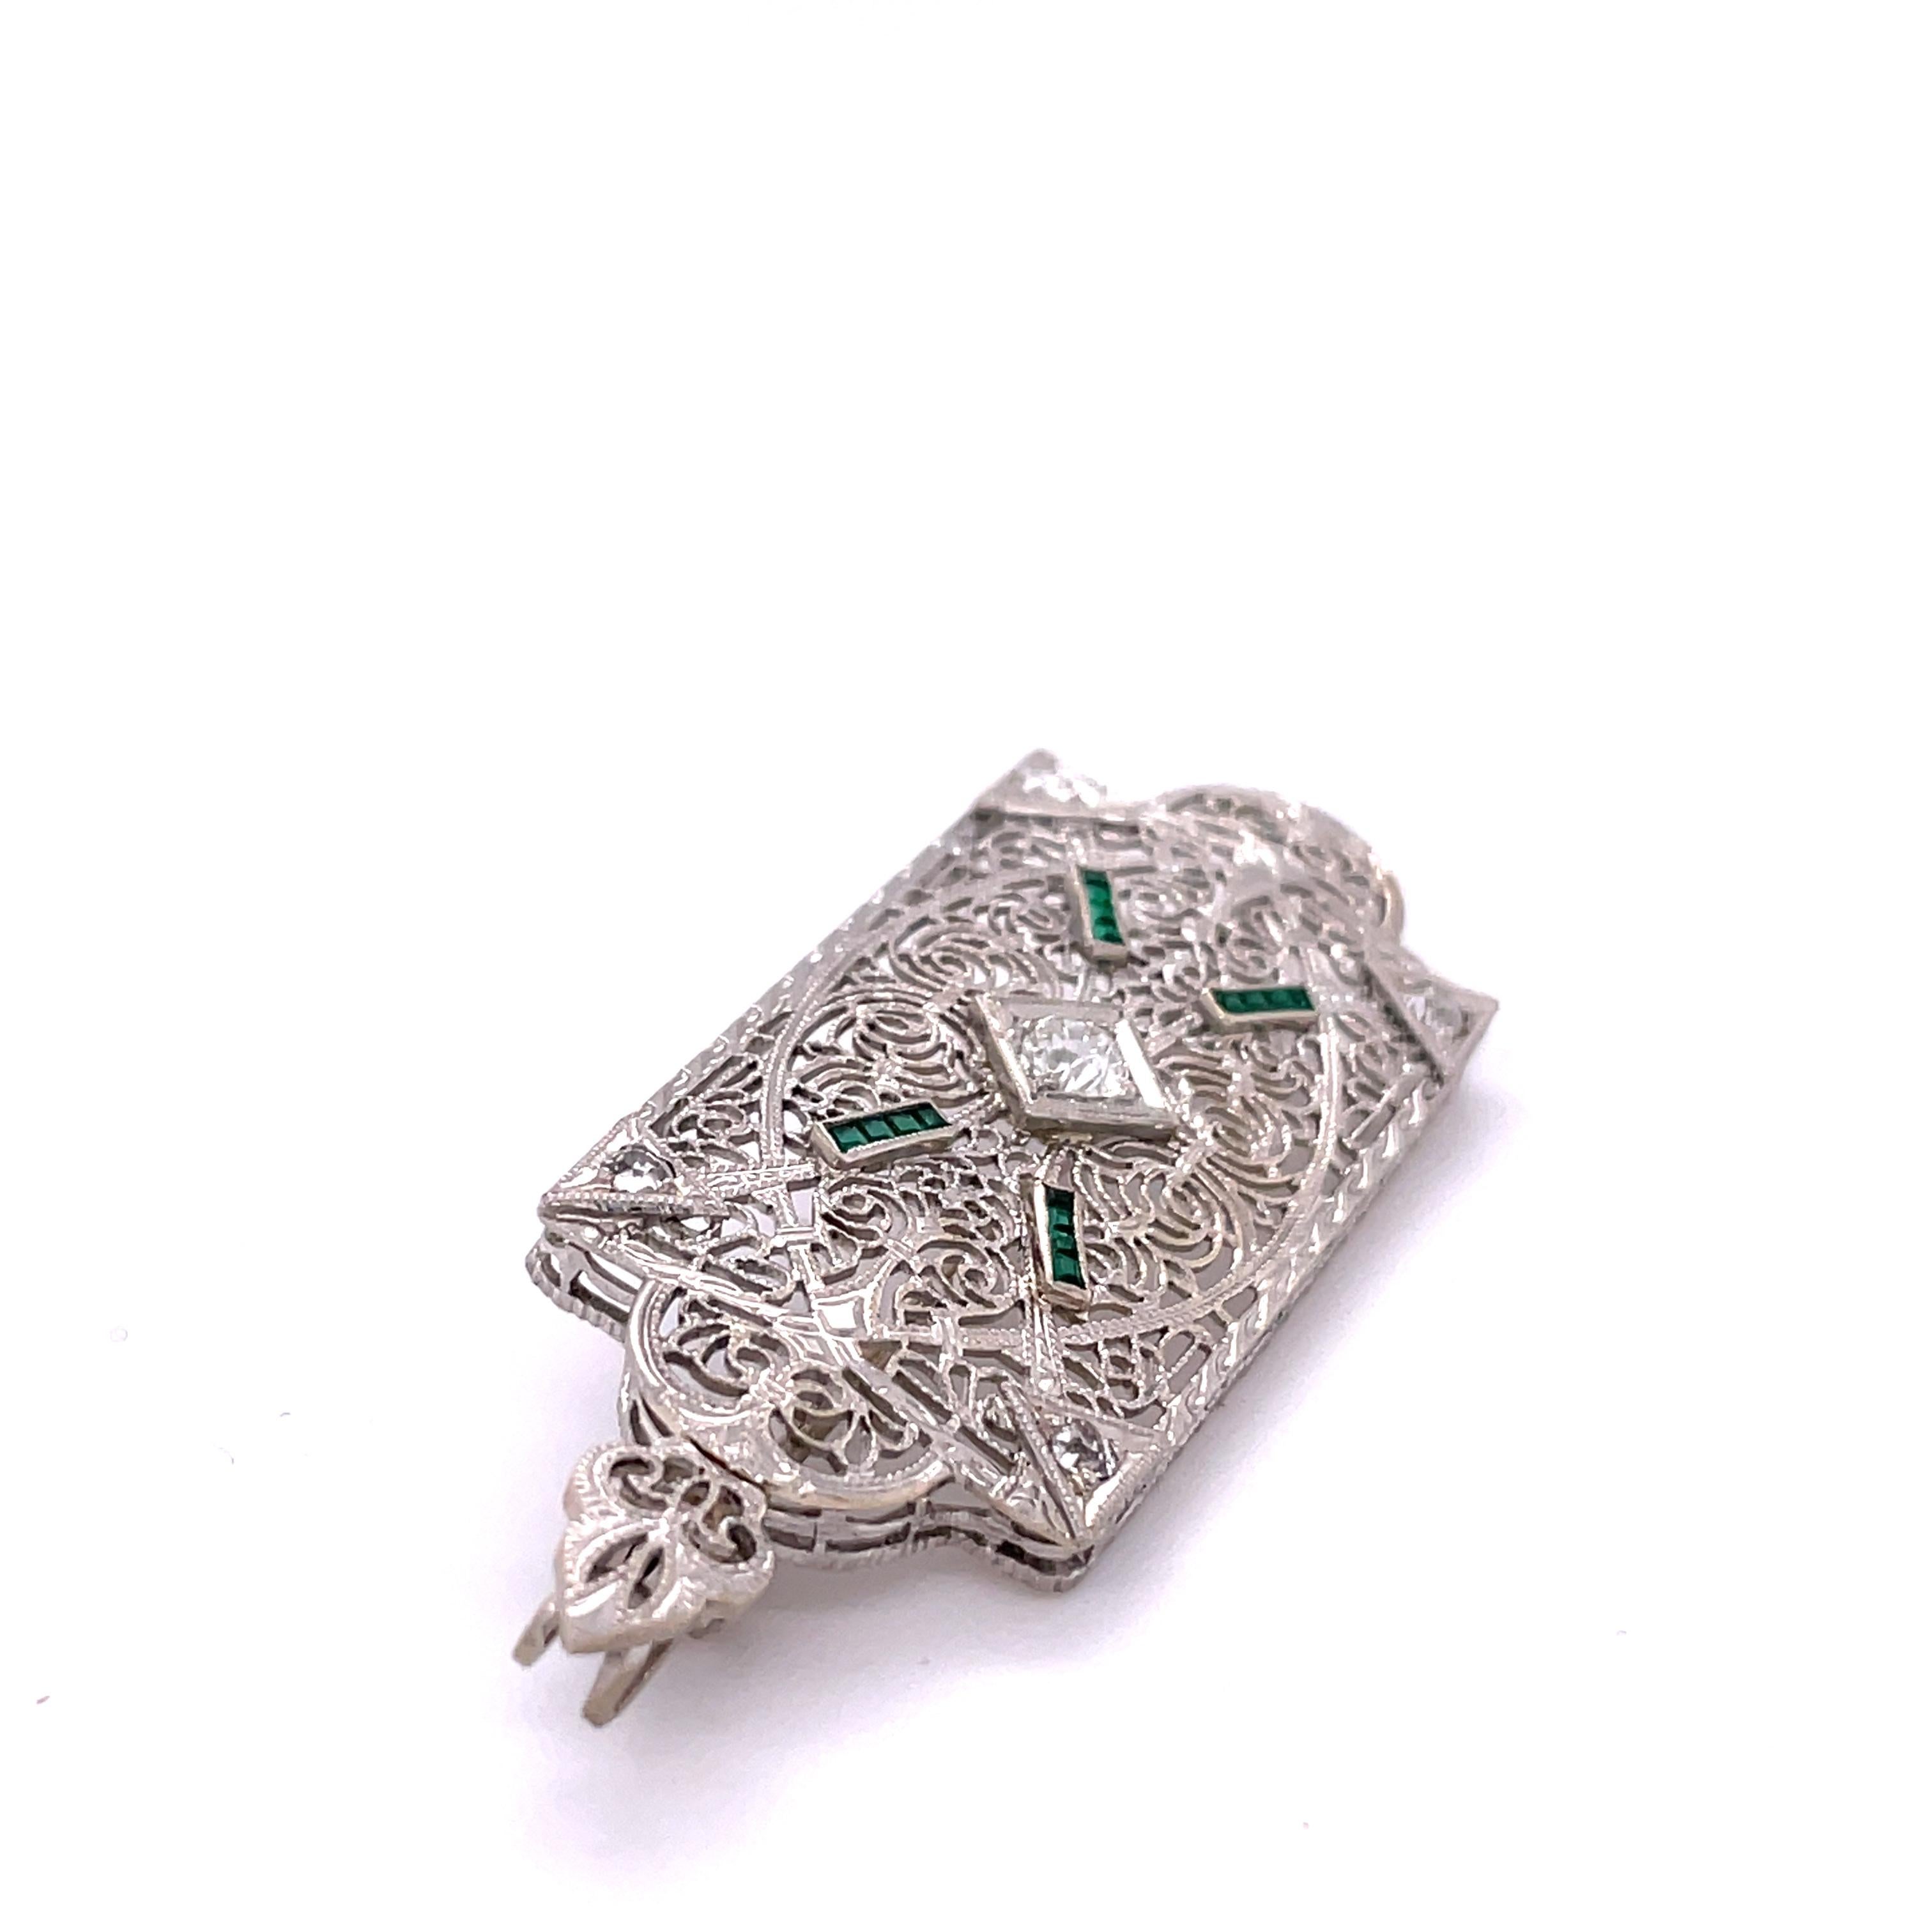 Item Details: 
Metal Type: 14K White Gold  [Hallmarked, and Tested]
Weight:  5.1 grams

Center Diamond Details:
Weight: .20ct, total weight
Cut: Old European brilliant
Color: G
Clarity: VS

Side Stone Details:
Weight: .30cttw
Cut: Straight Baguette